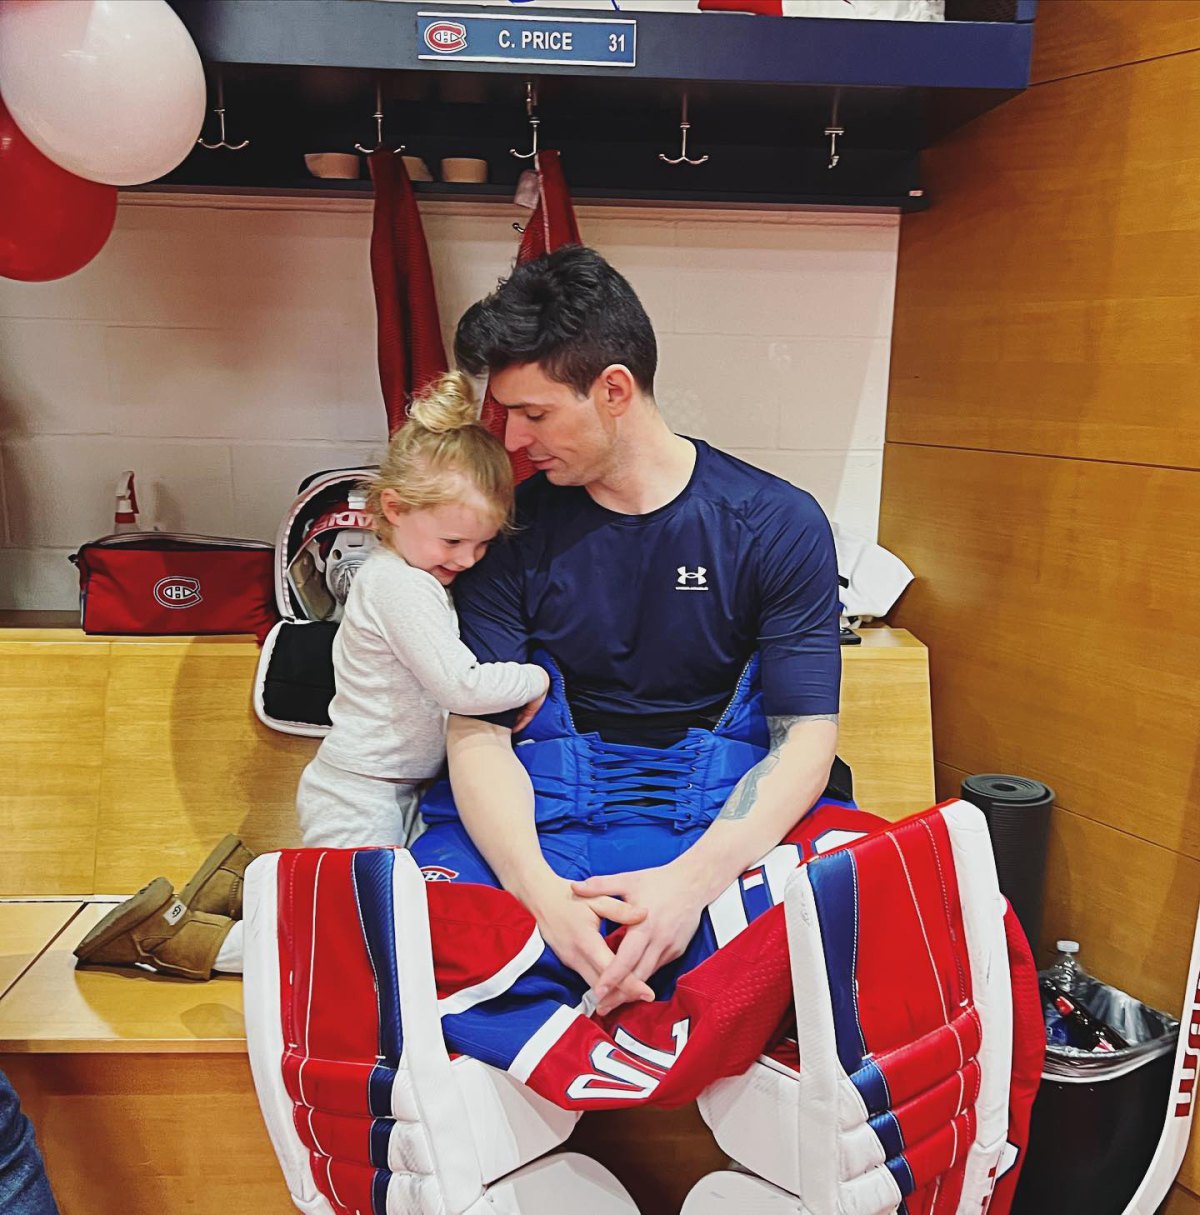 Hottest NHL Dads: Hockey Players Whose Kids Are Their No. 1 Fans